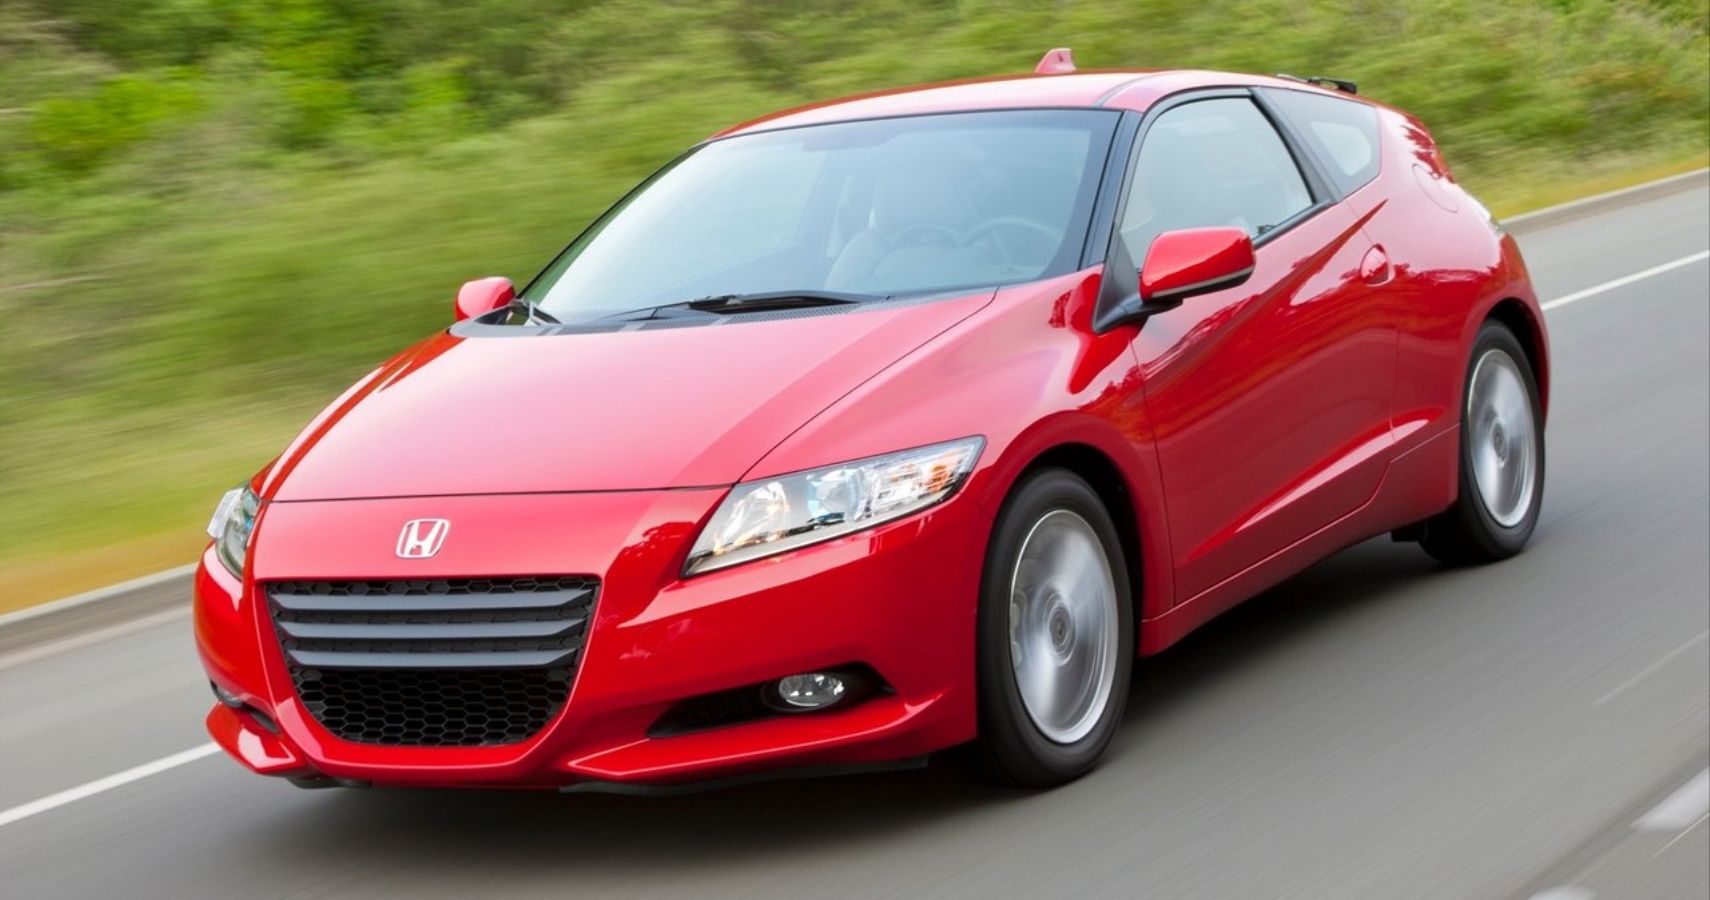 Honda CR-Z 2012 In Red Front Quarter View